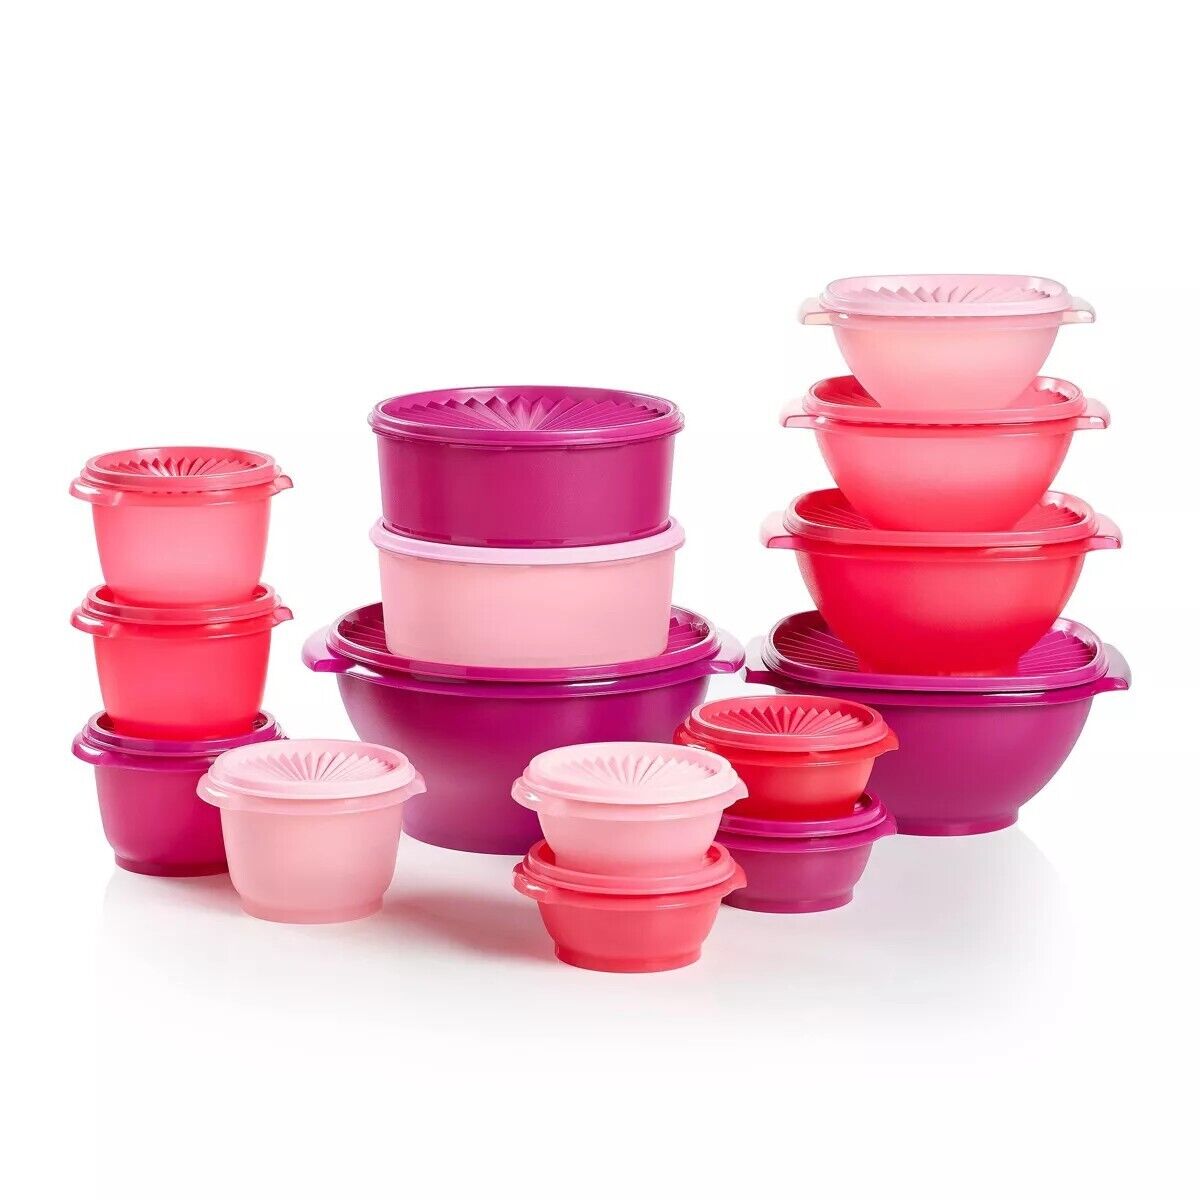 Tupperware 30pc Heritage Get it All Set Food Storage Container Set- Pink